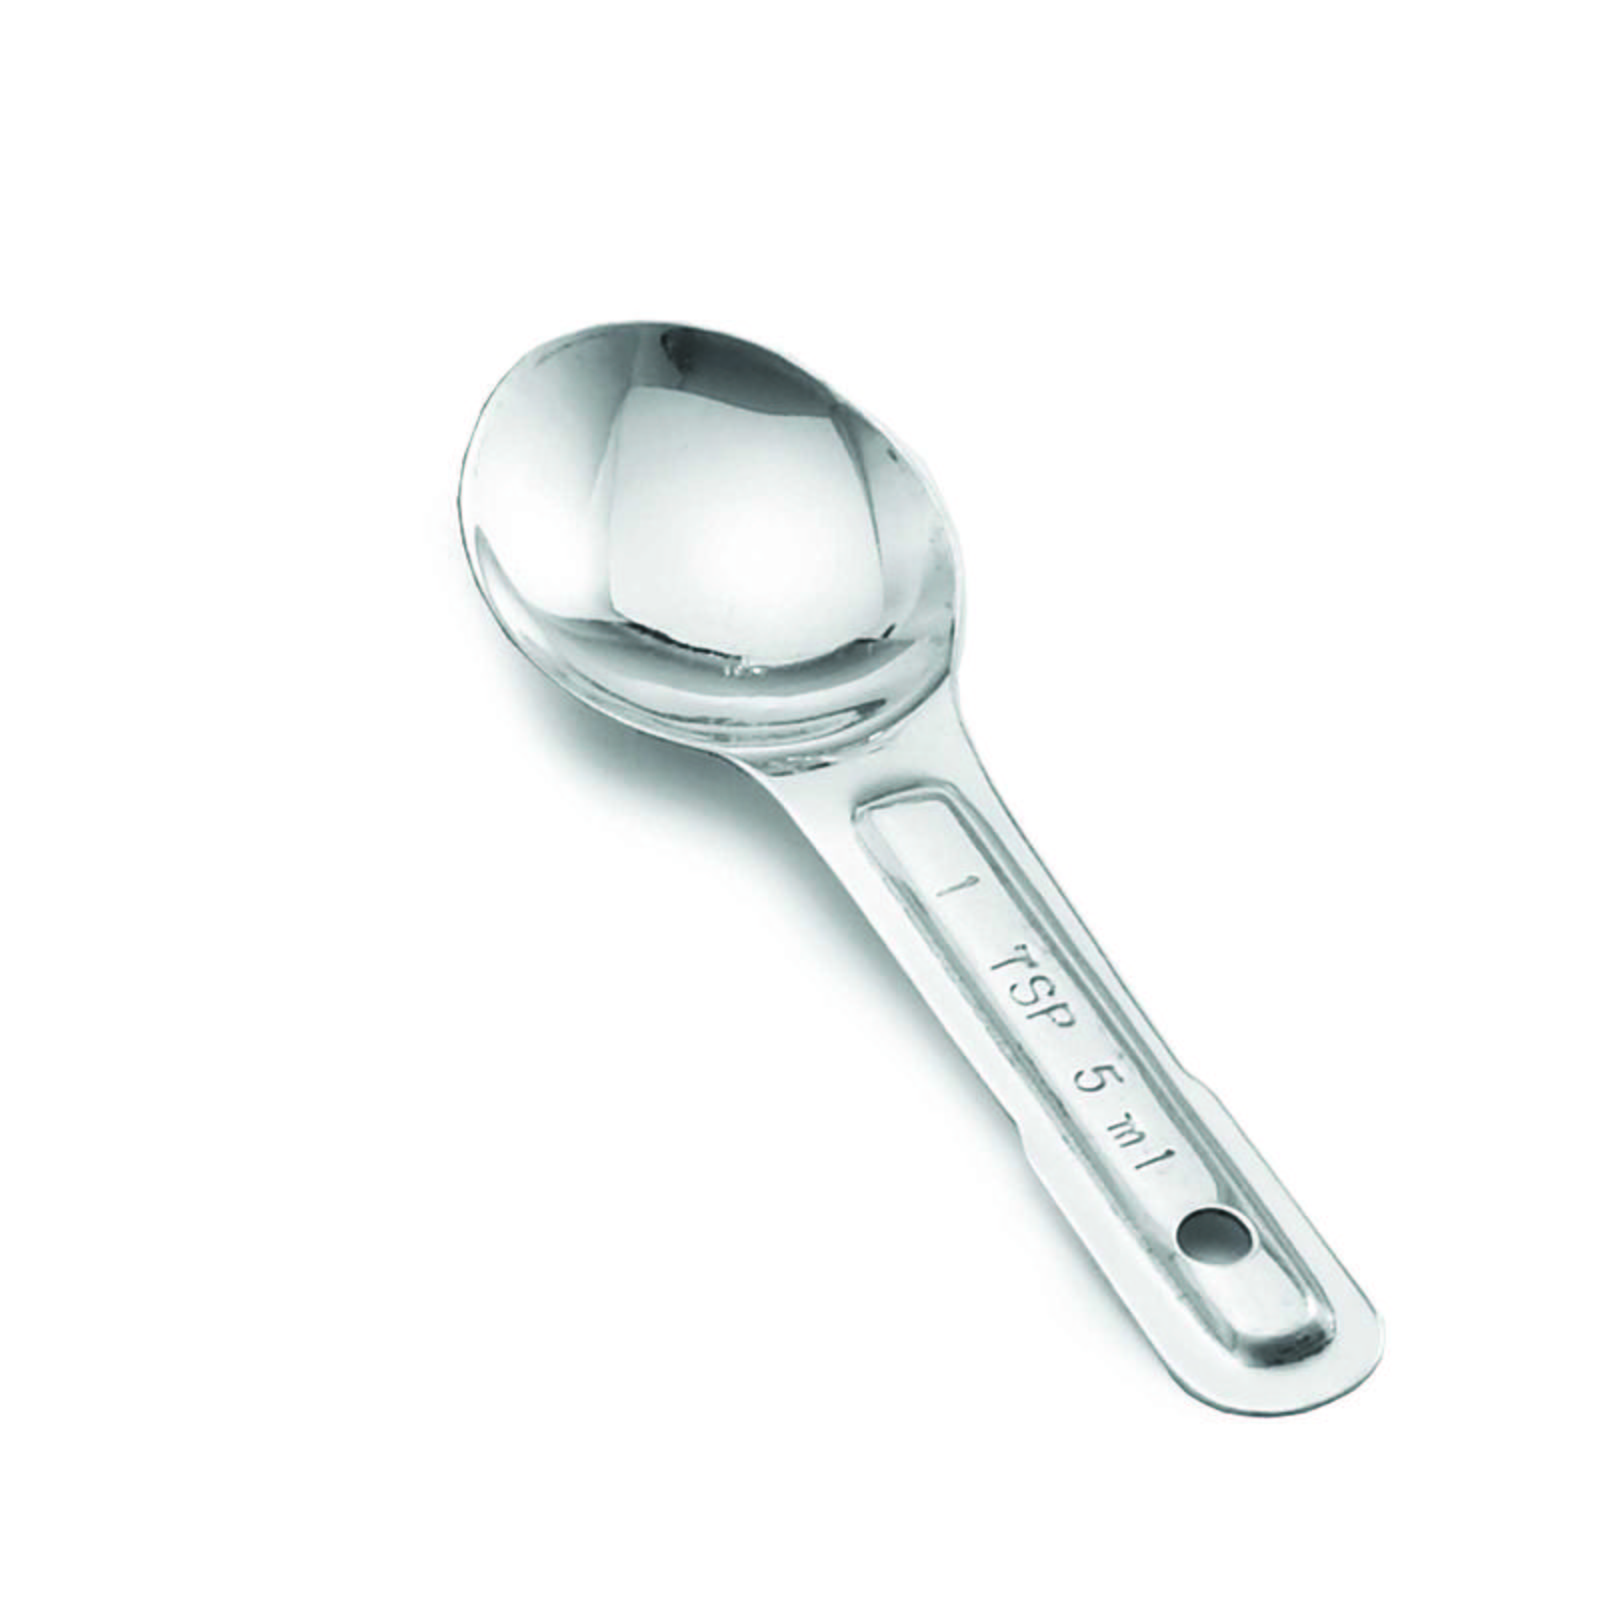 Measuring Spoon One Tablespoon - The Republic of Tea | One Tablespoon Measuring Spoon